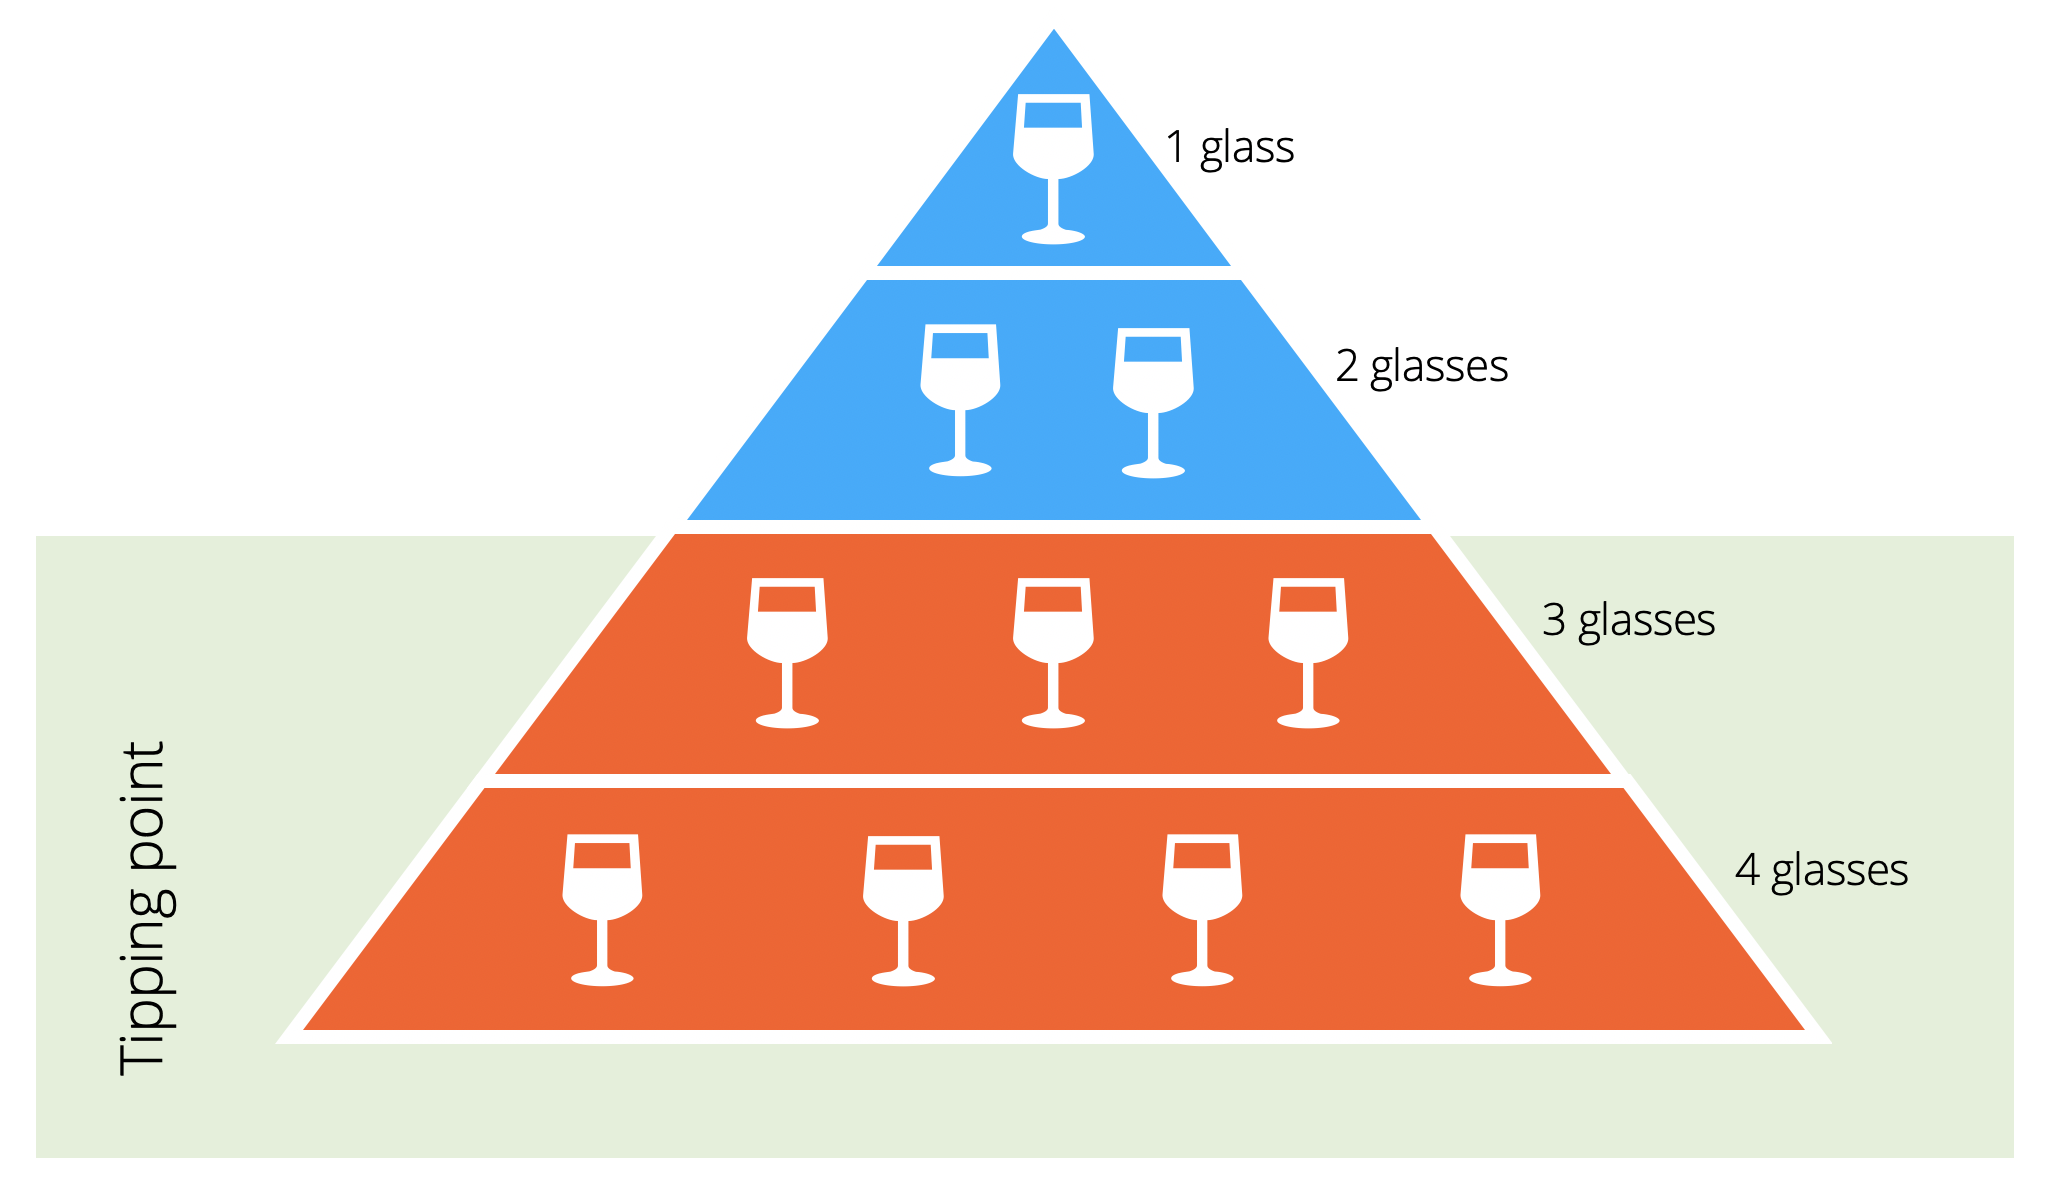 Pyramid diagram illustrating the average tipping point of 3-4 alcoholic drinks. 